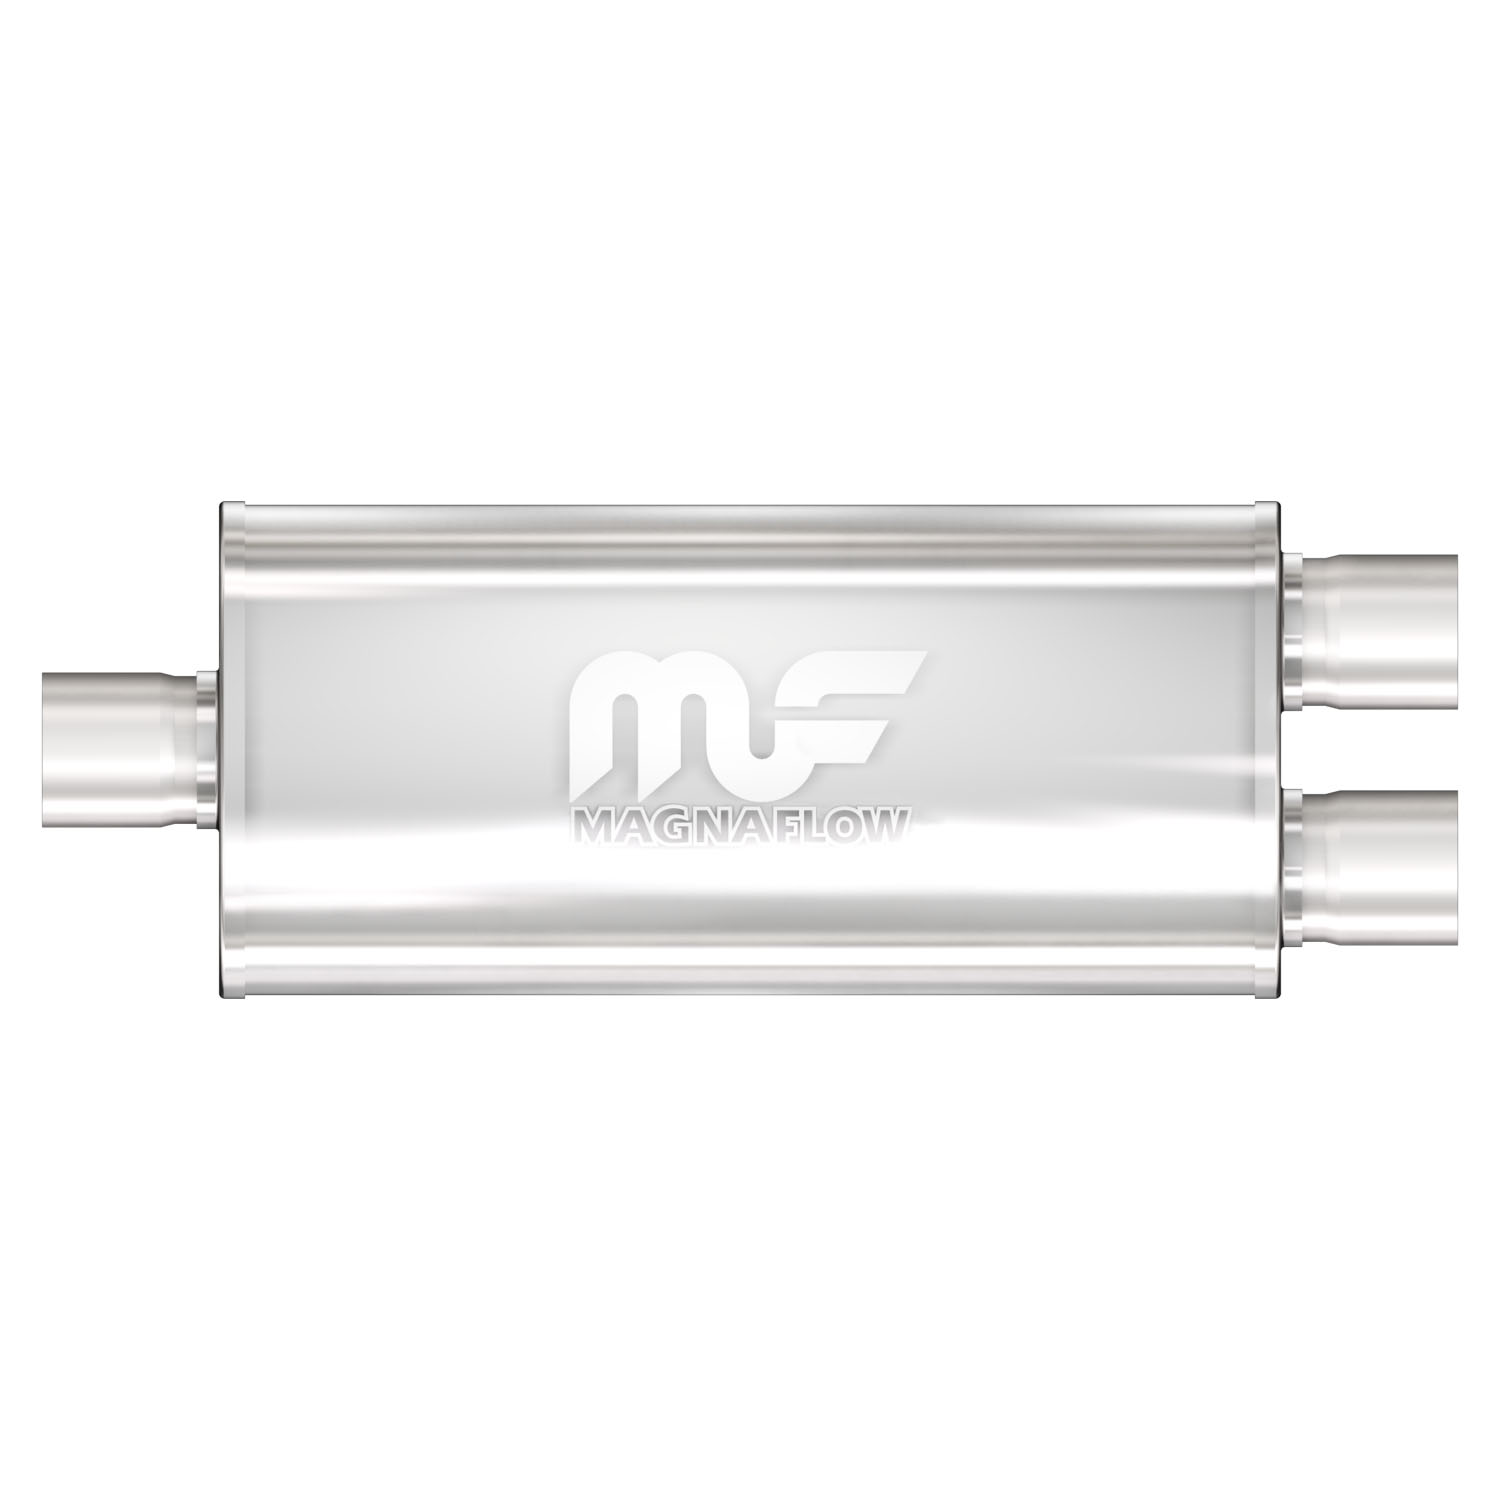 5" x 8" Oval Muffler Center In/Dual Out: 3"/3" Body Length: 18" Overall Length: 24" Core Size: 3" Polished Finish